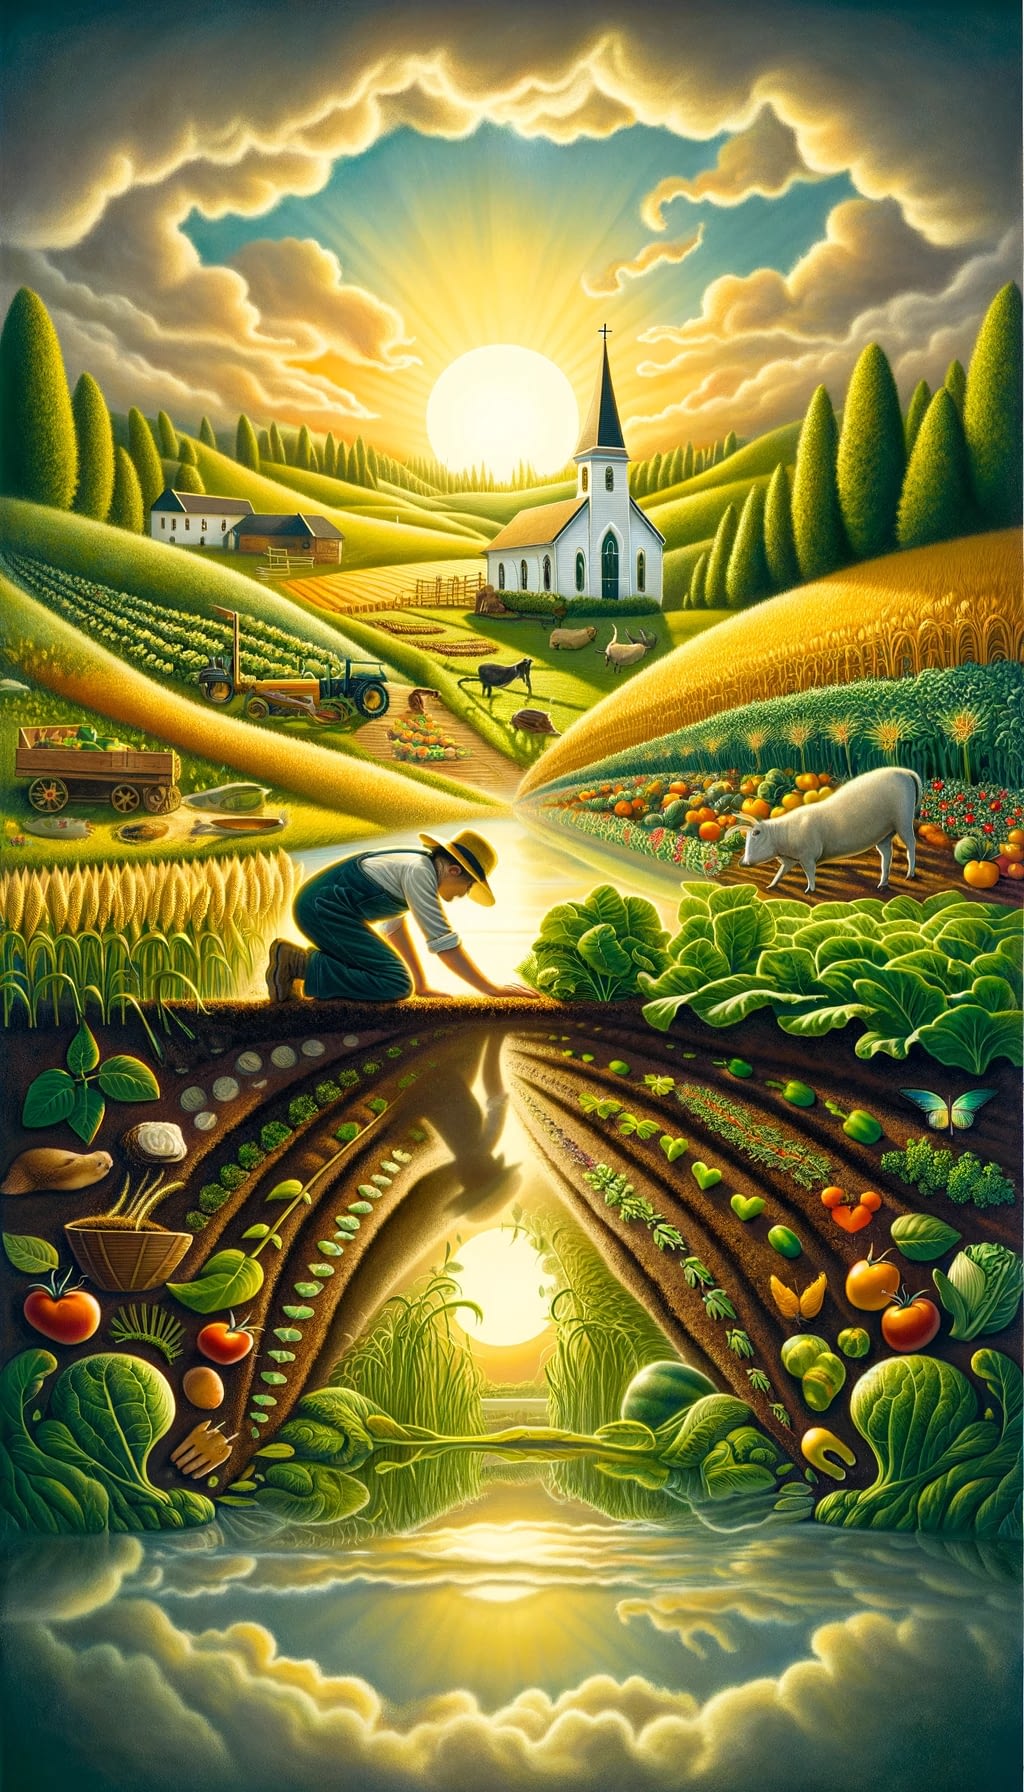 Dall&Middot;E 2024 03 01 18.01.44 A Whimsical Image That Captures The Essence Of Reflecting On Food Faith And Stewardship From A Christian Perspective On Modern Agriculture. 1000 Px By 1500 -